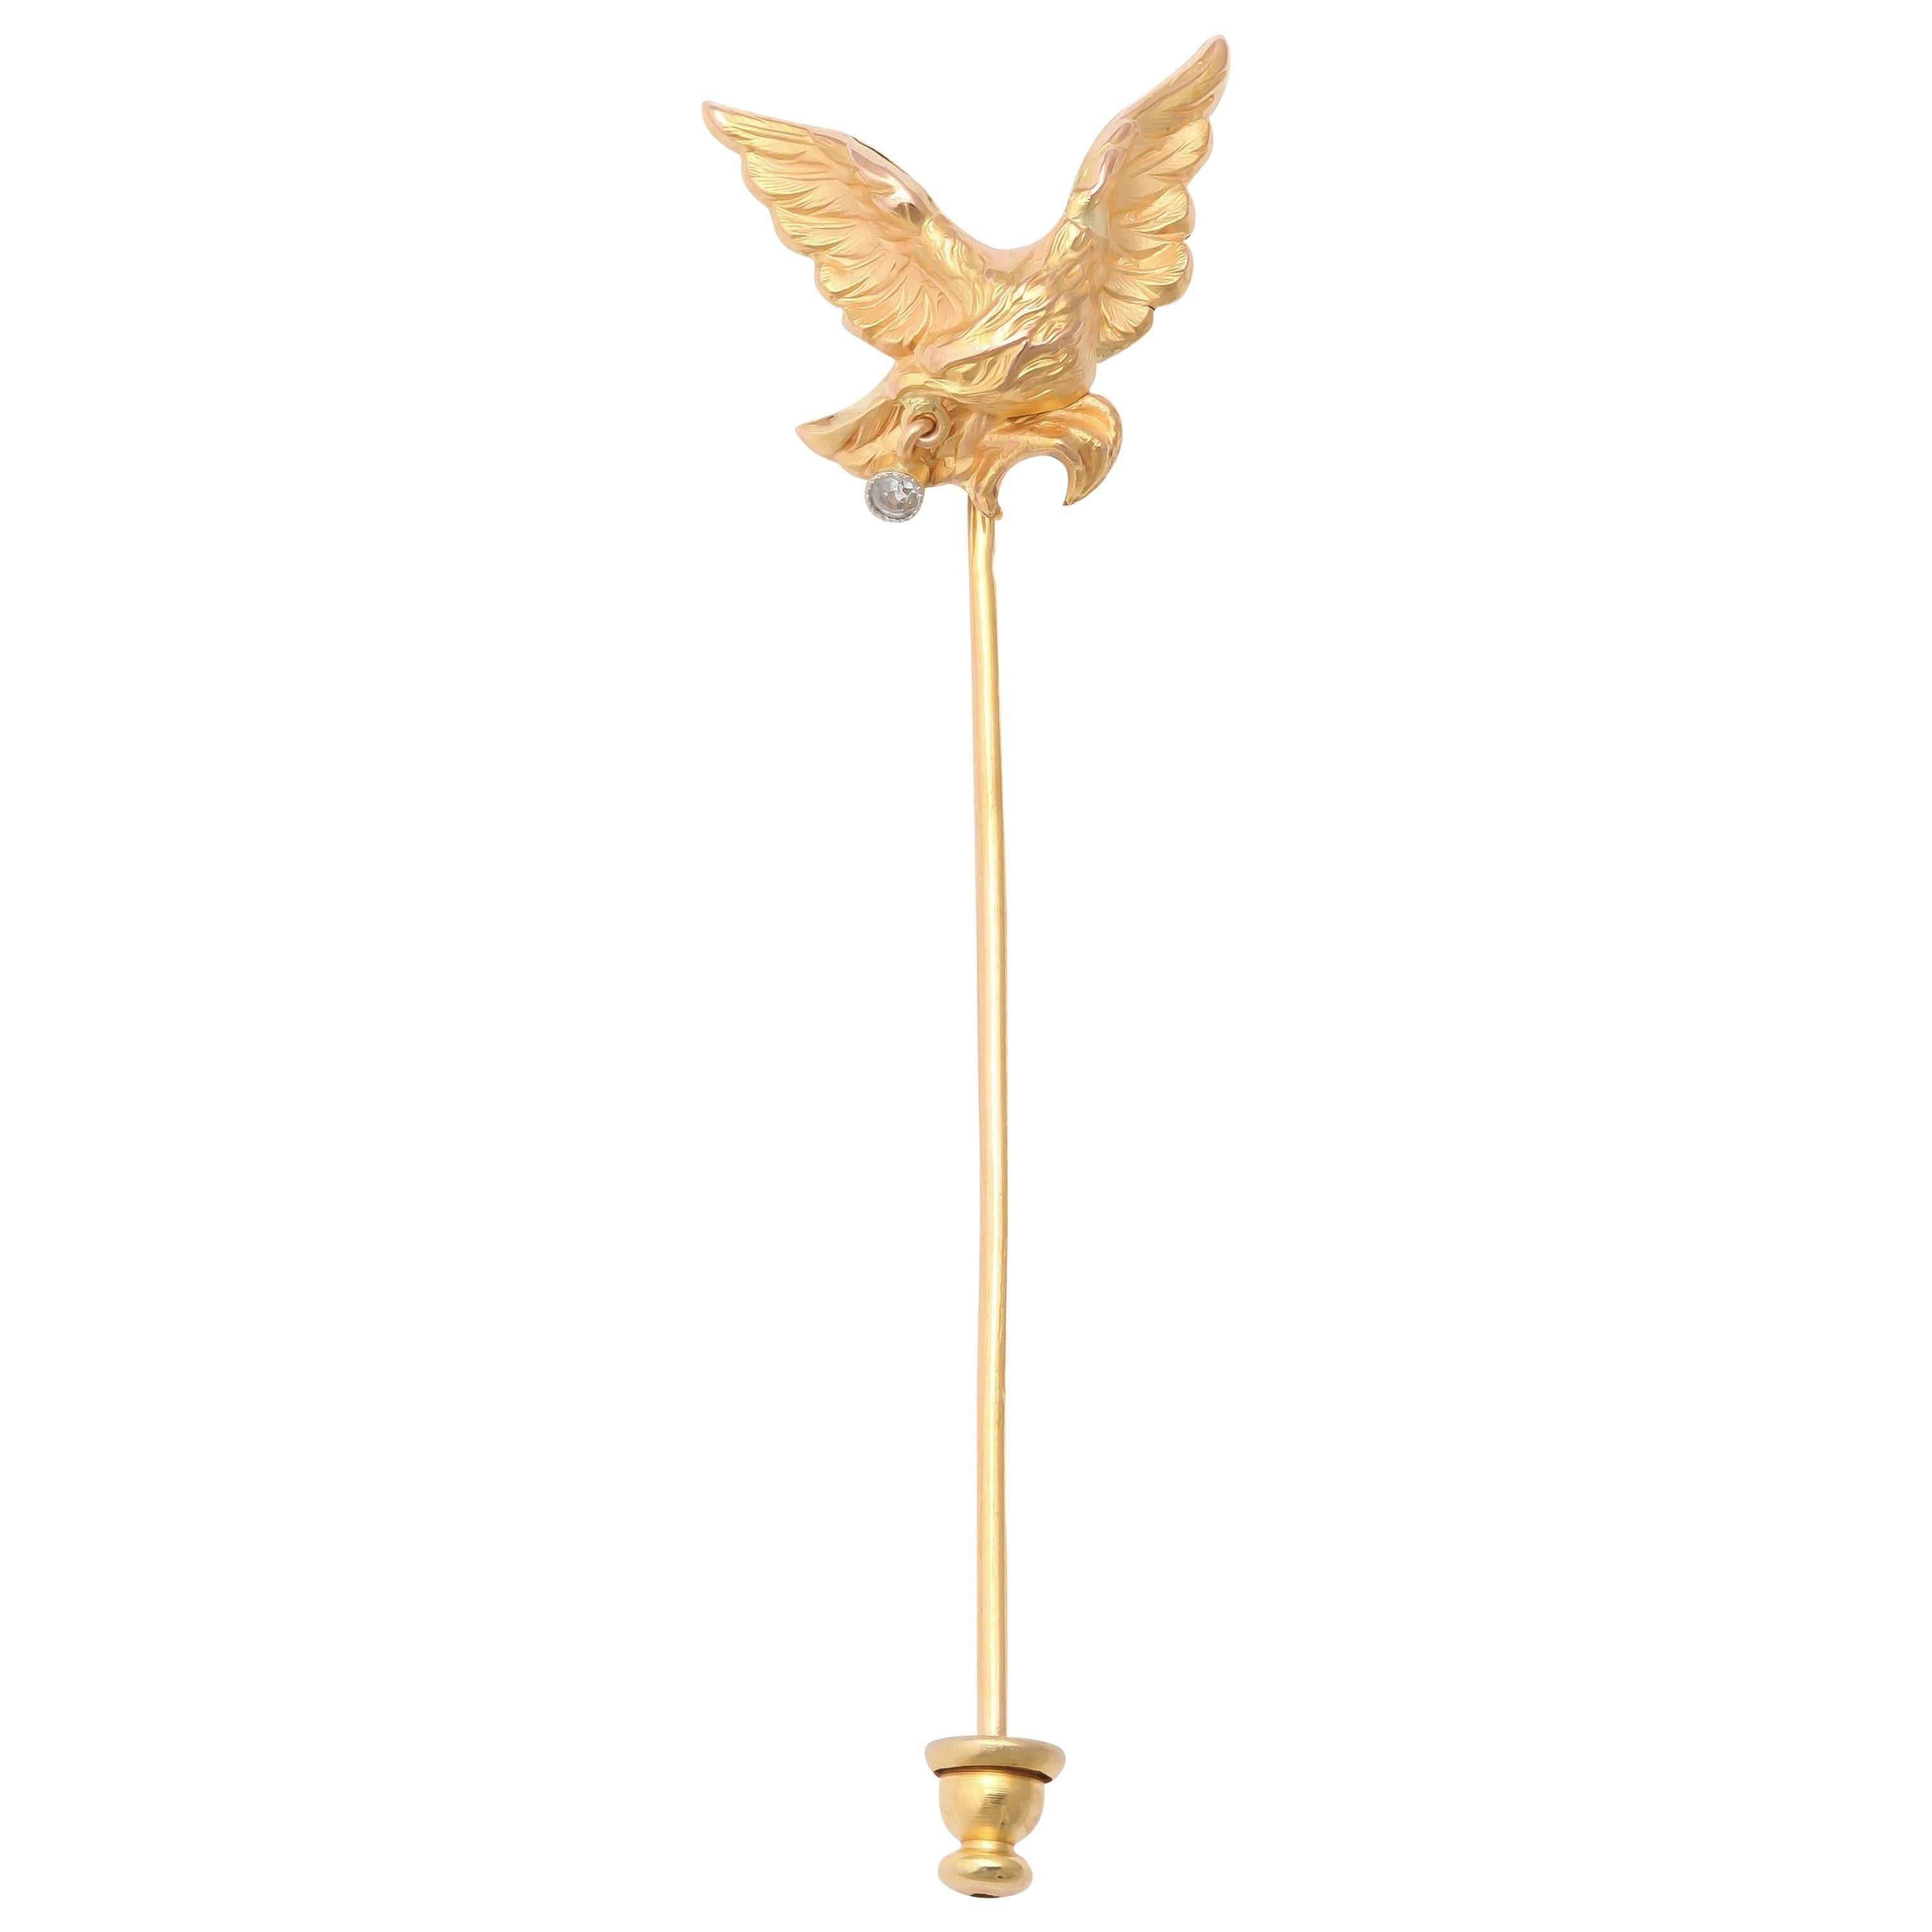 A Napoleonic eagle with outstretched wings clutching a small antique-cut diamond in its beak in 18k yellow gold.

Late 19th century, with French hallmark

2 3/4 in. (7 cm.) long; wingspan 7/8 in. (2.2 cm.)